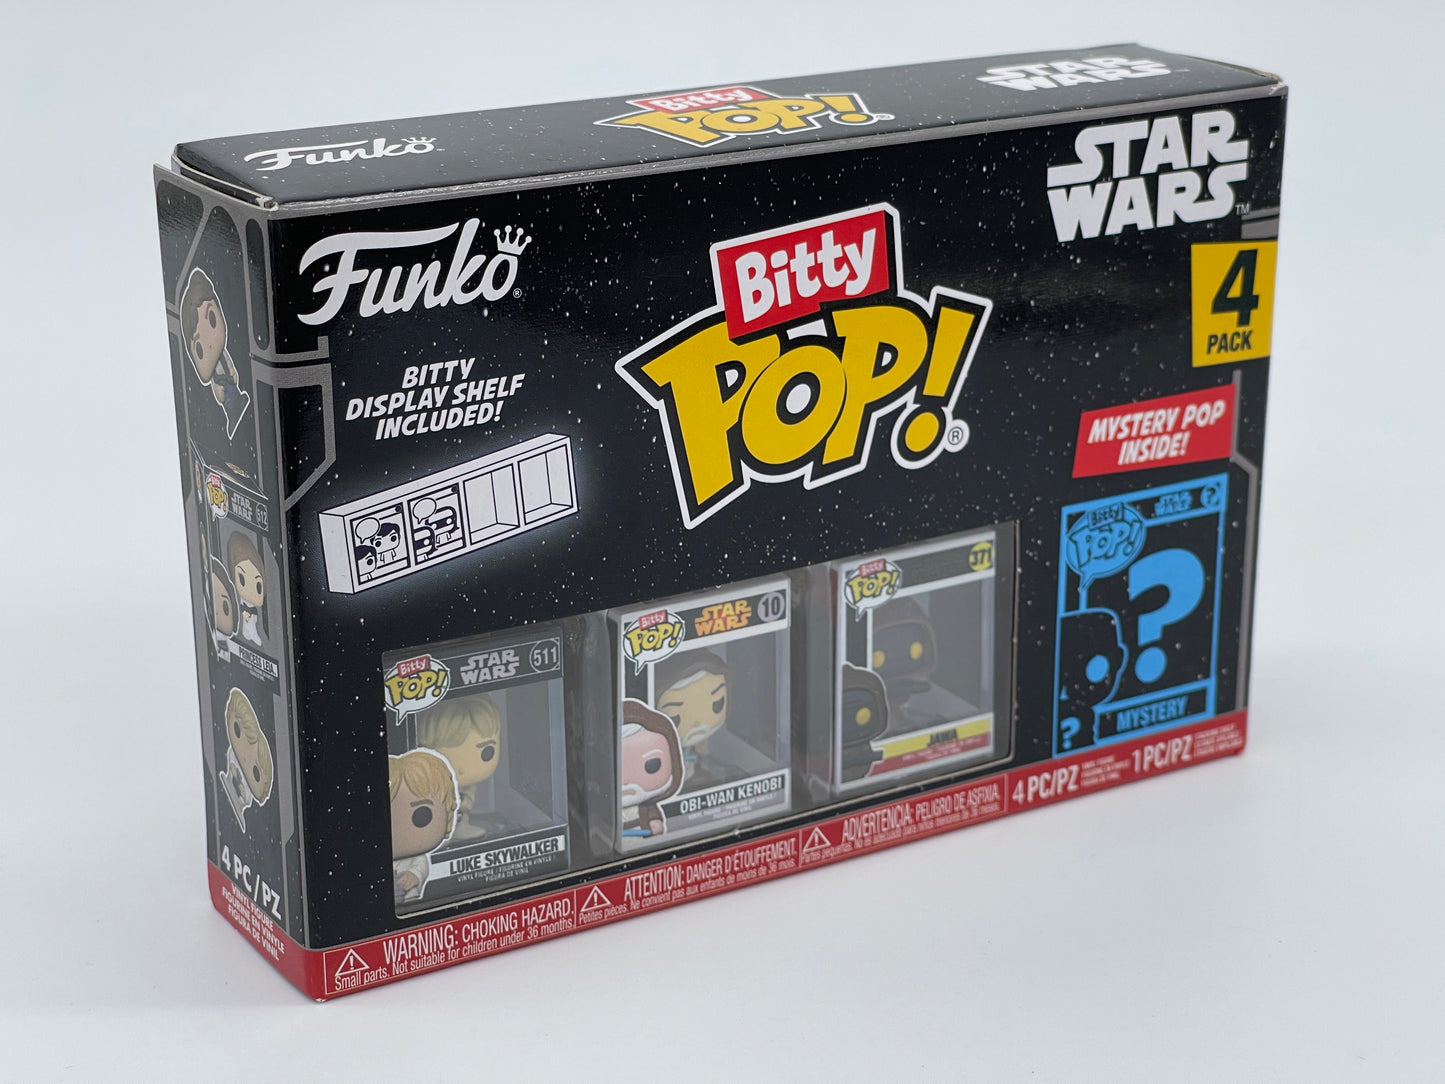 Funko Bitty Pop! Star Wars with Mystery Pop Collection Micro Figures (2023) 